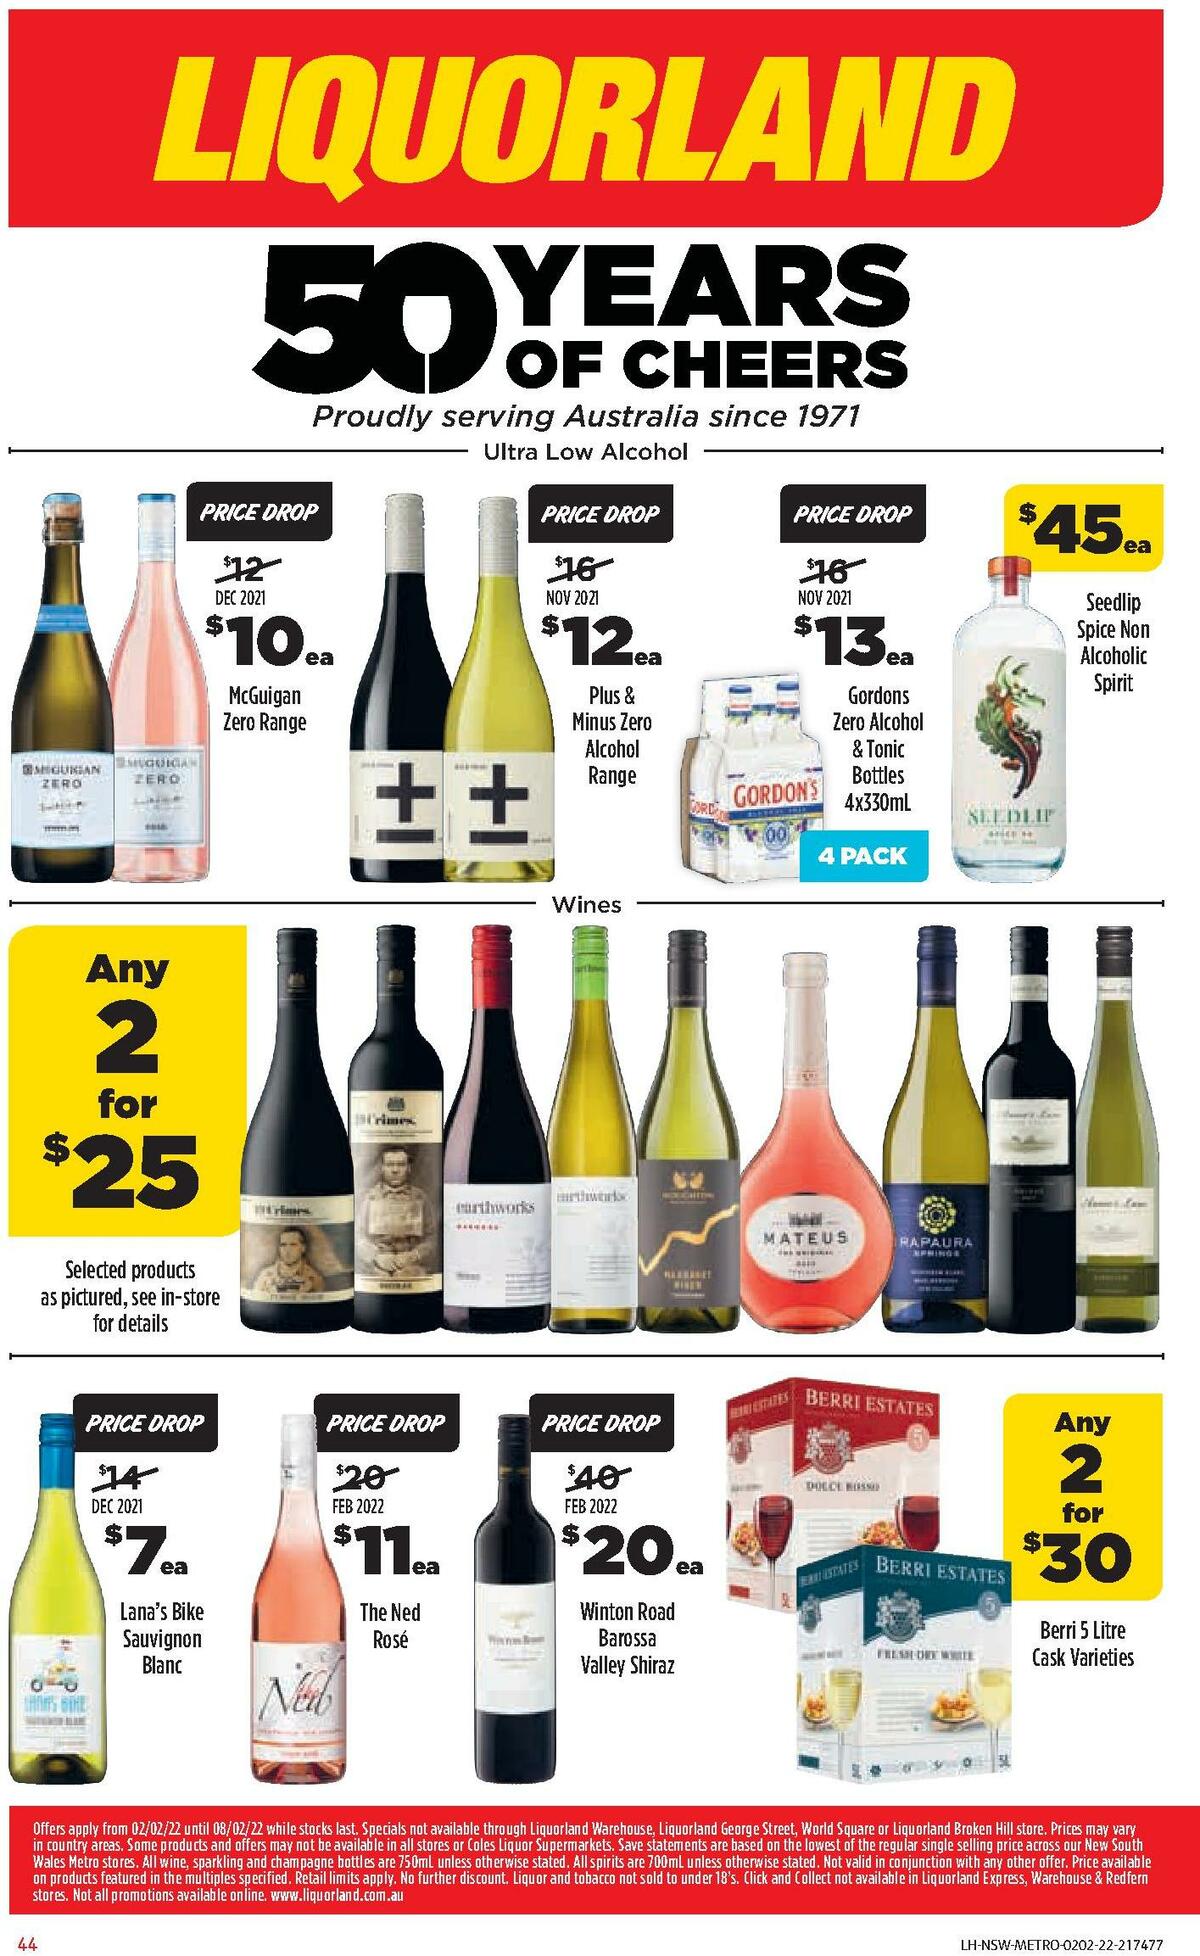 Coles Catalogues from 2 February